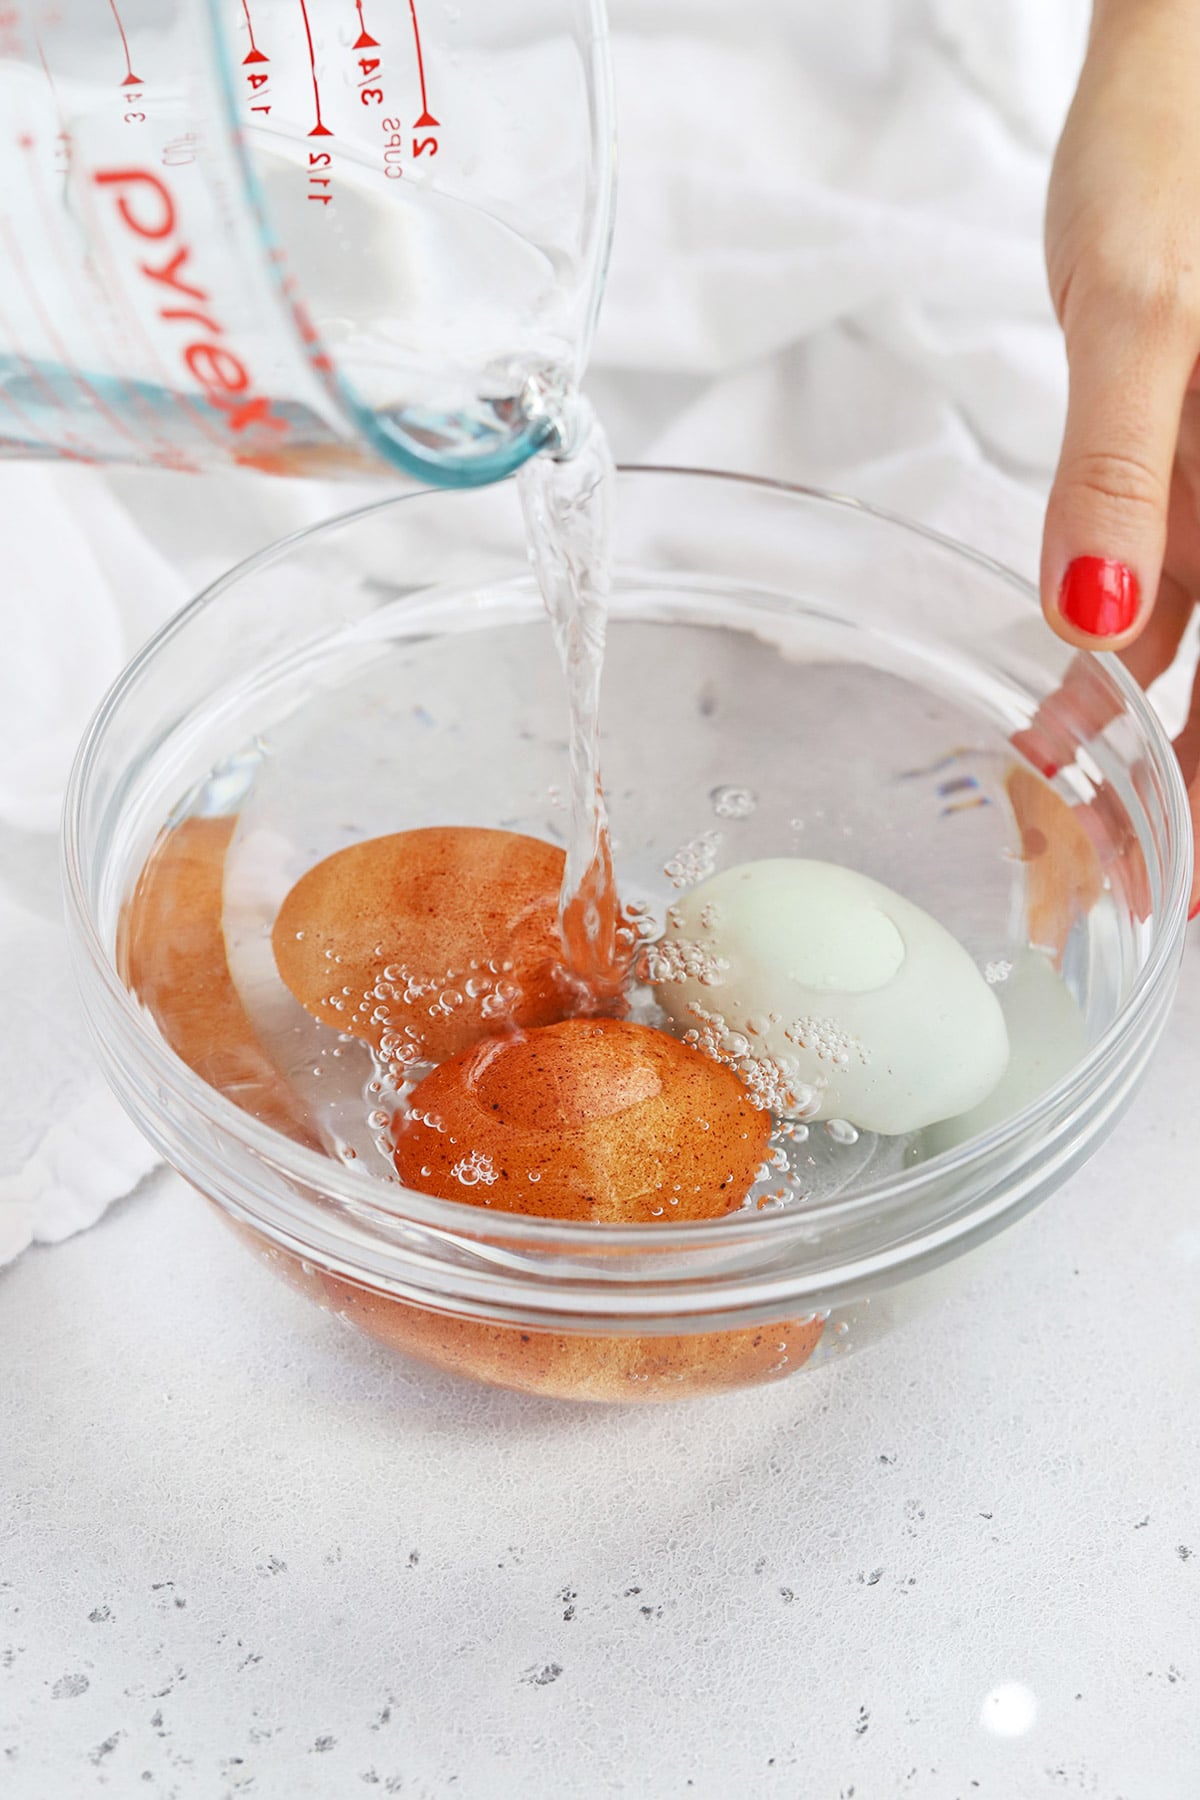 Pouring water over eggs in a bowl to bring them to room temperature